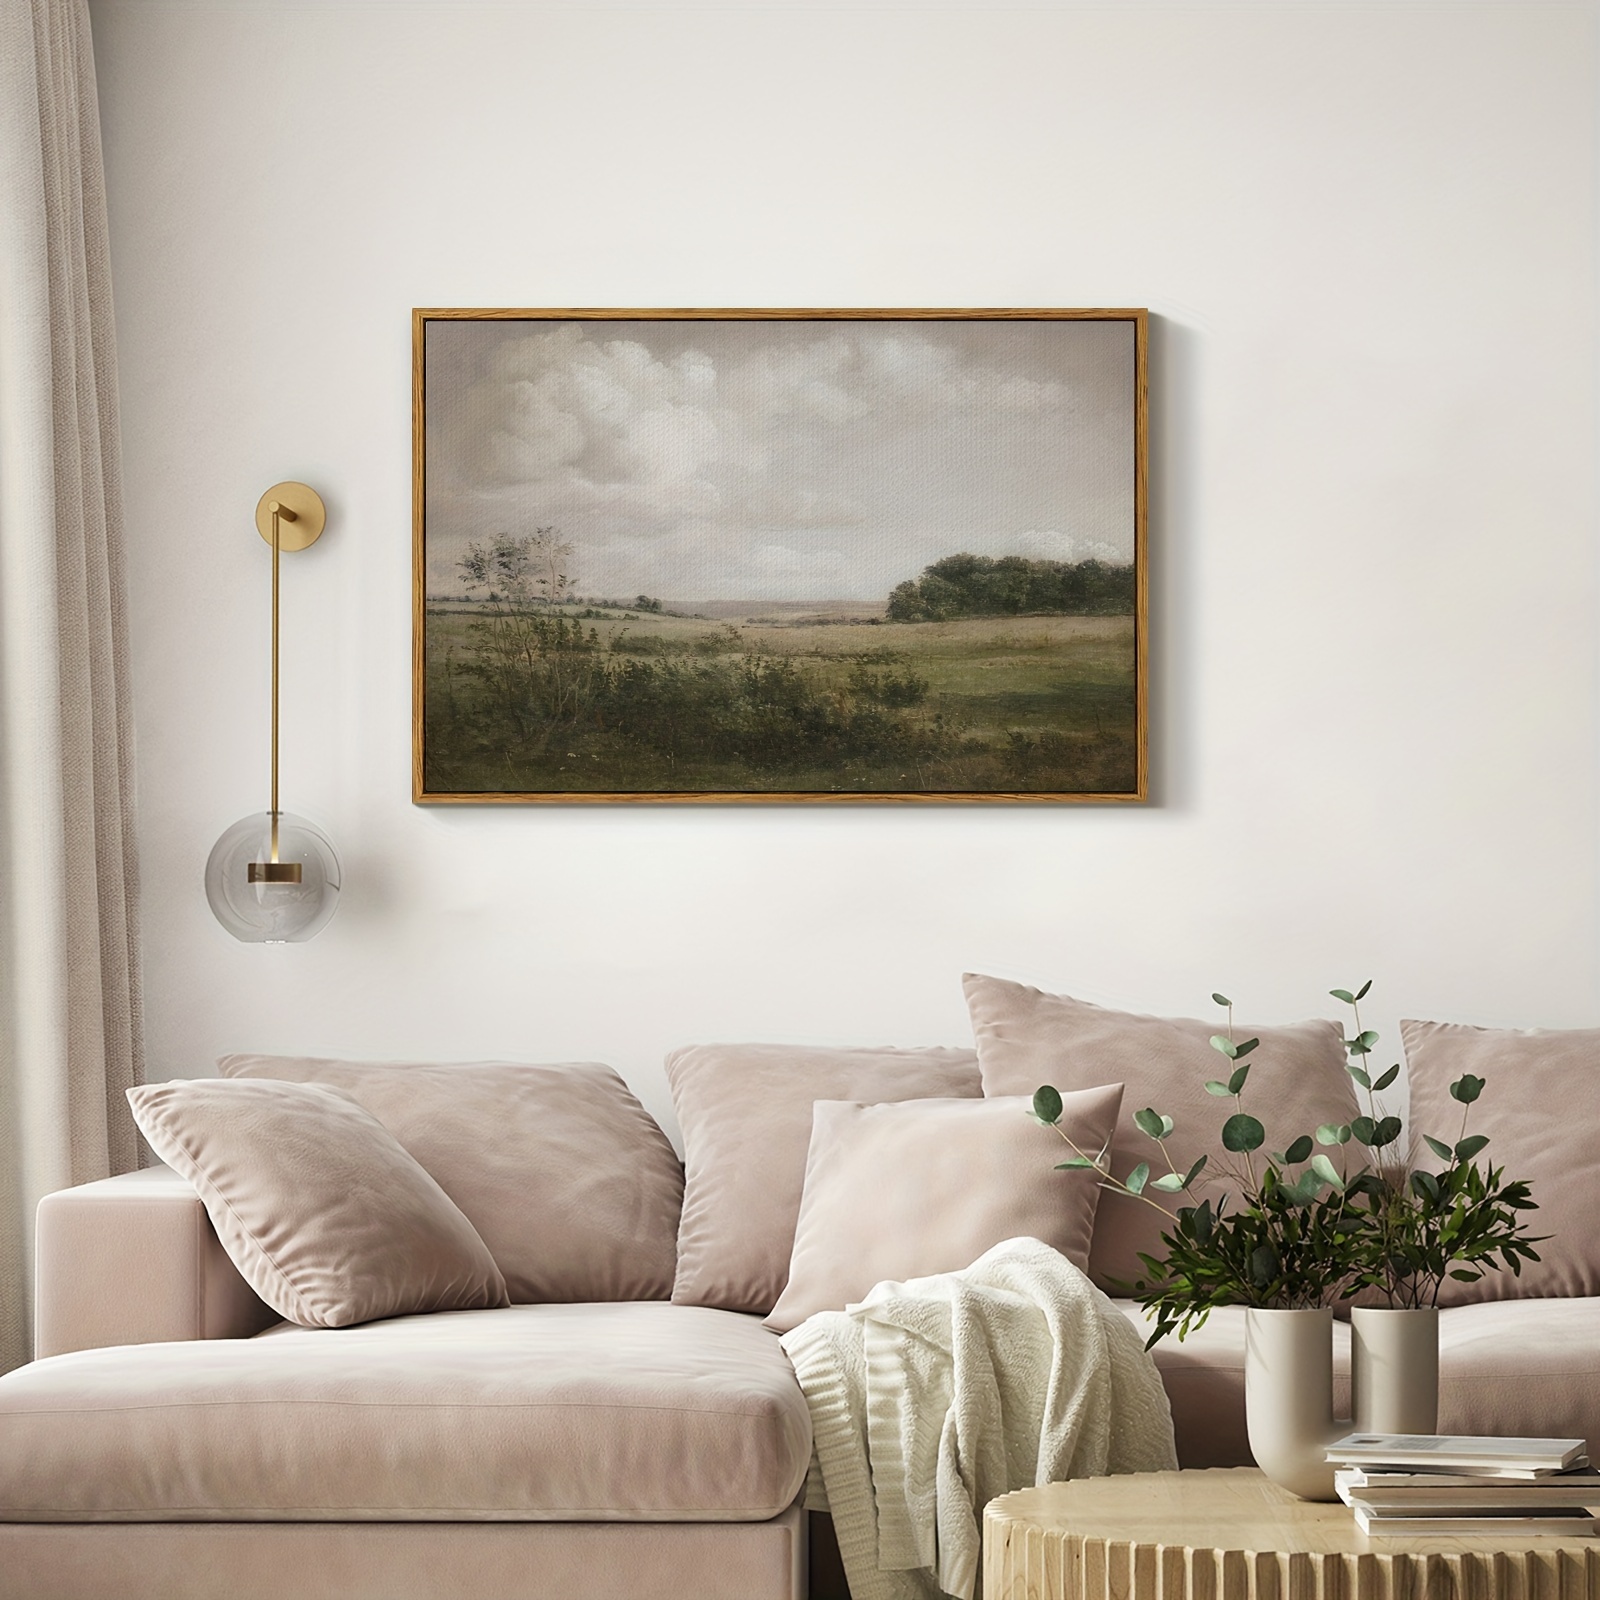 

1 Framed Vintage Large Format Wall Art Piece, Featuring Natural Wilderness Landscape Artwork For Home Decoration Aesthetics, A Canvas Print Of A Rustic Countryside Scene, Sized 24 By 36 Inches.